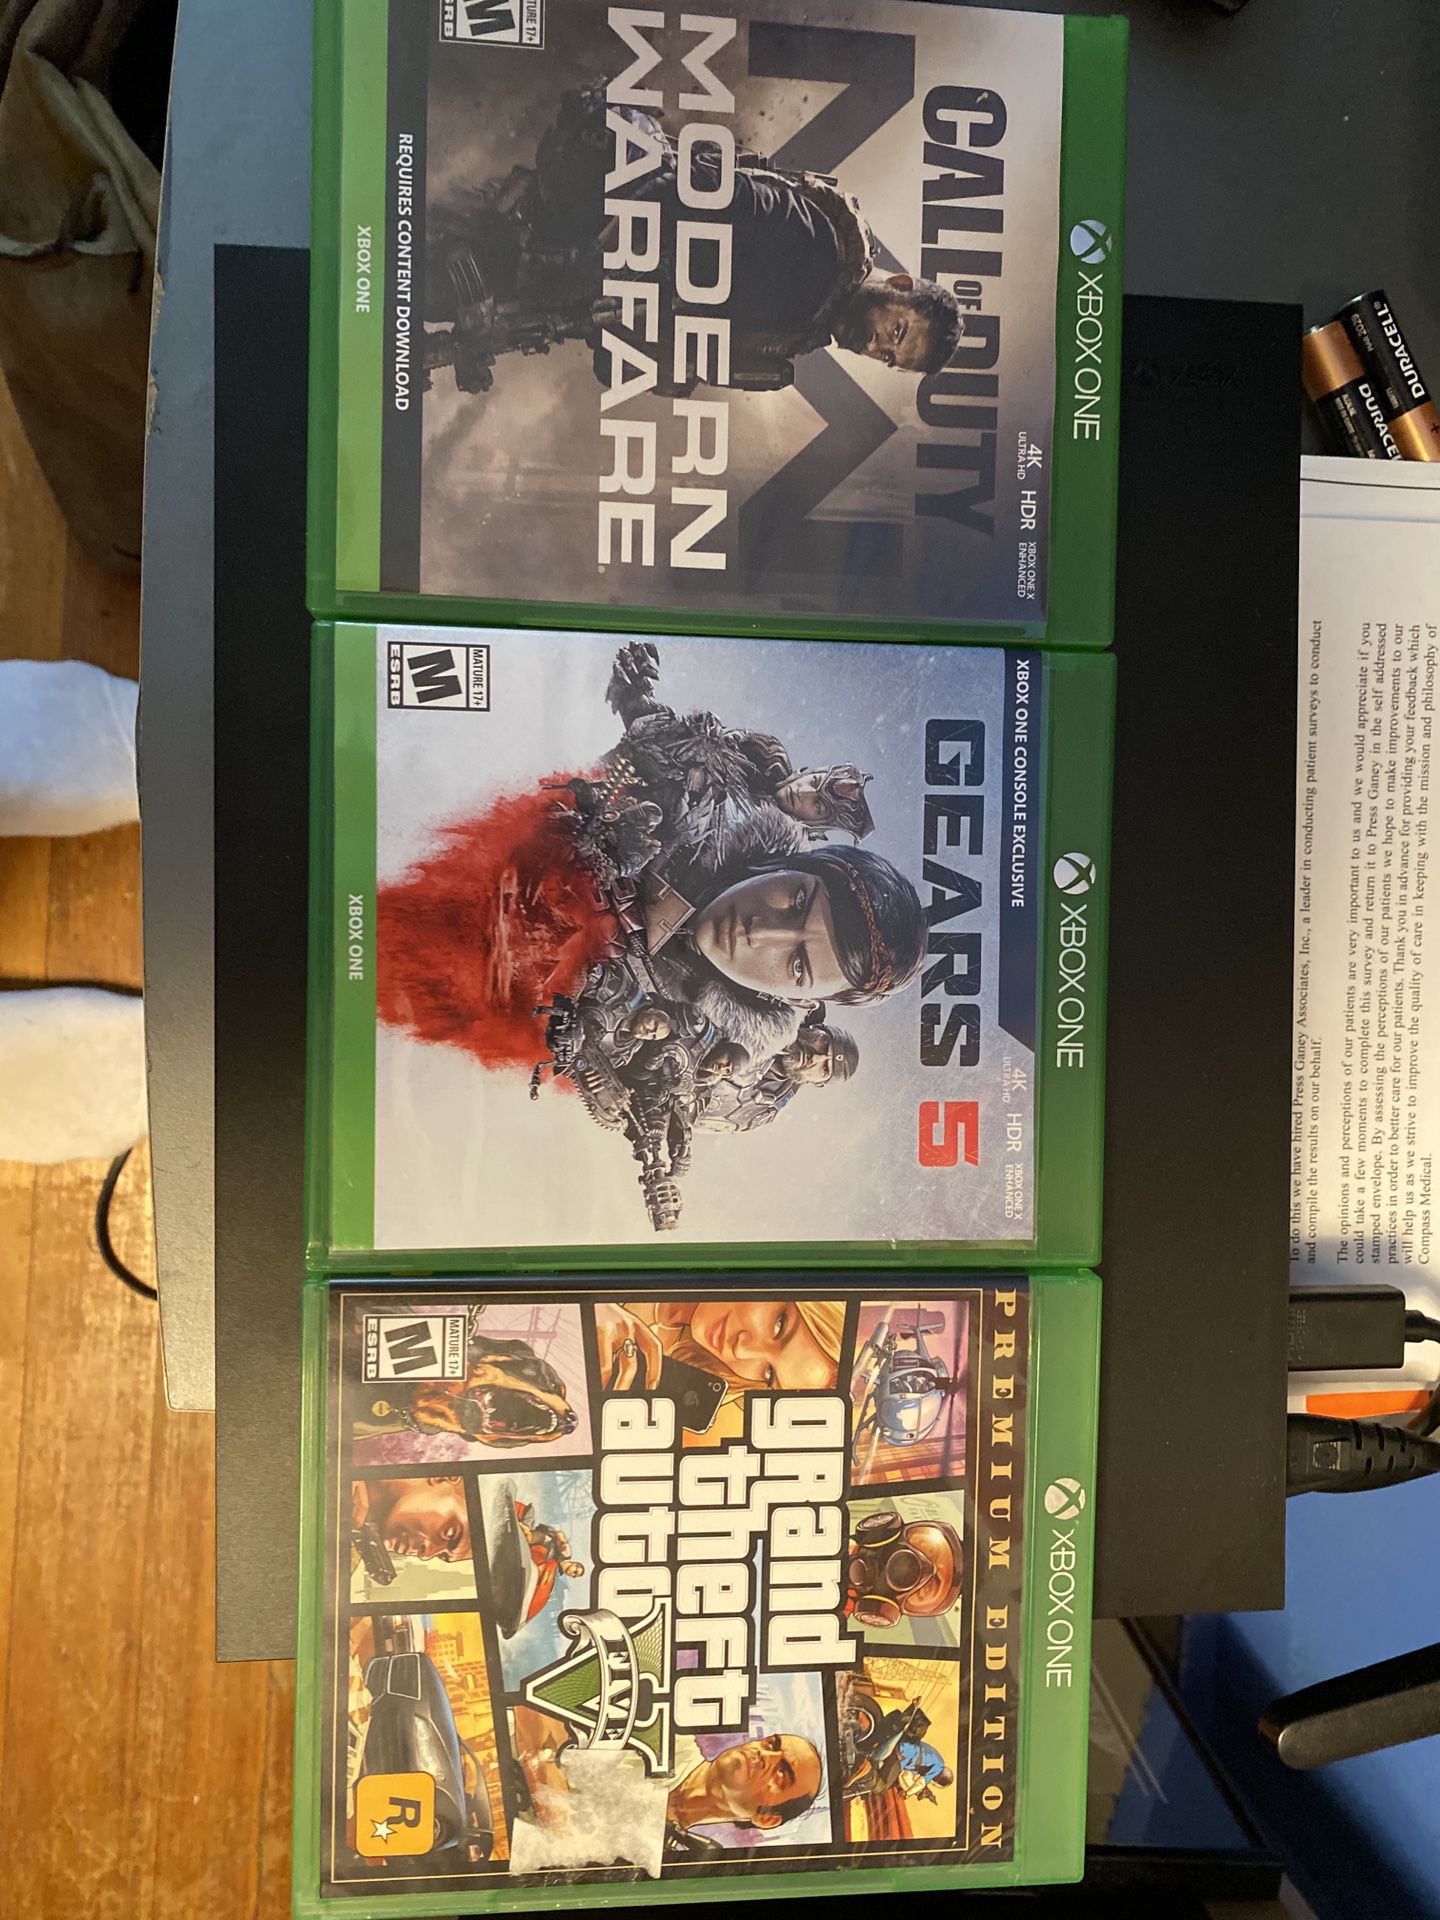 Xbox one X with games